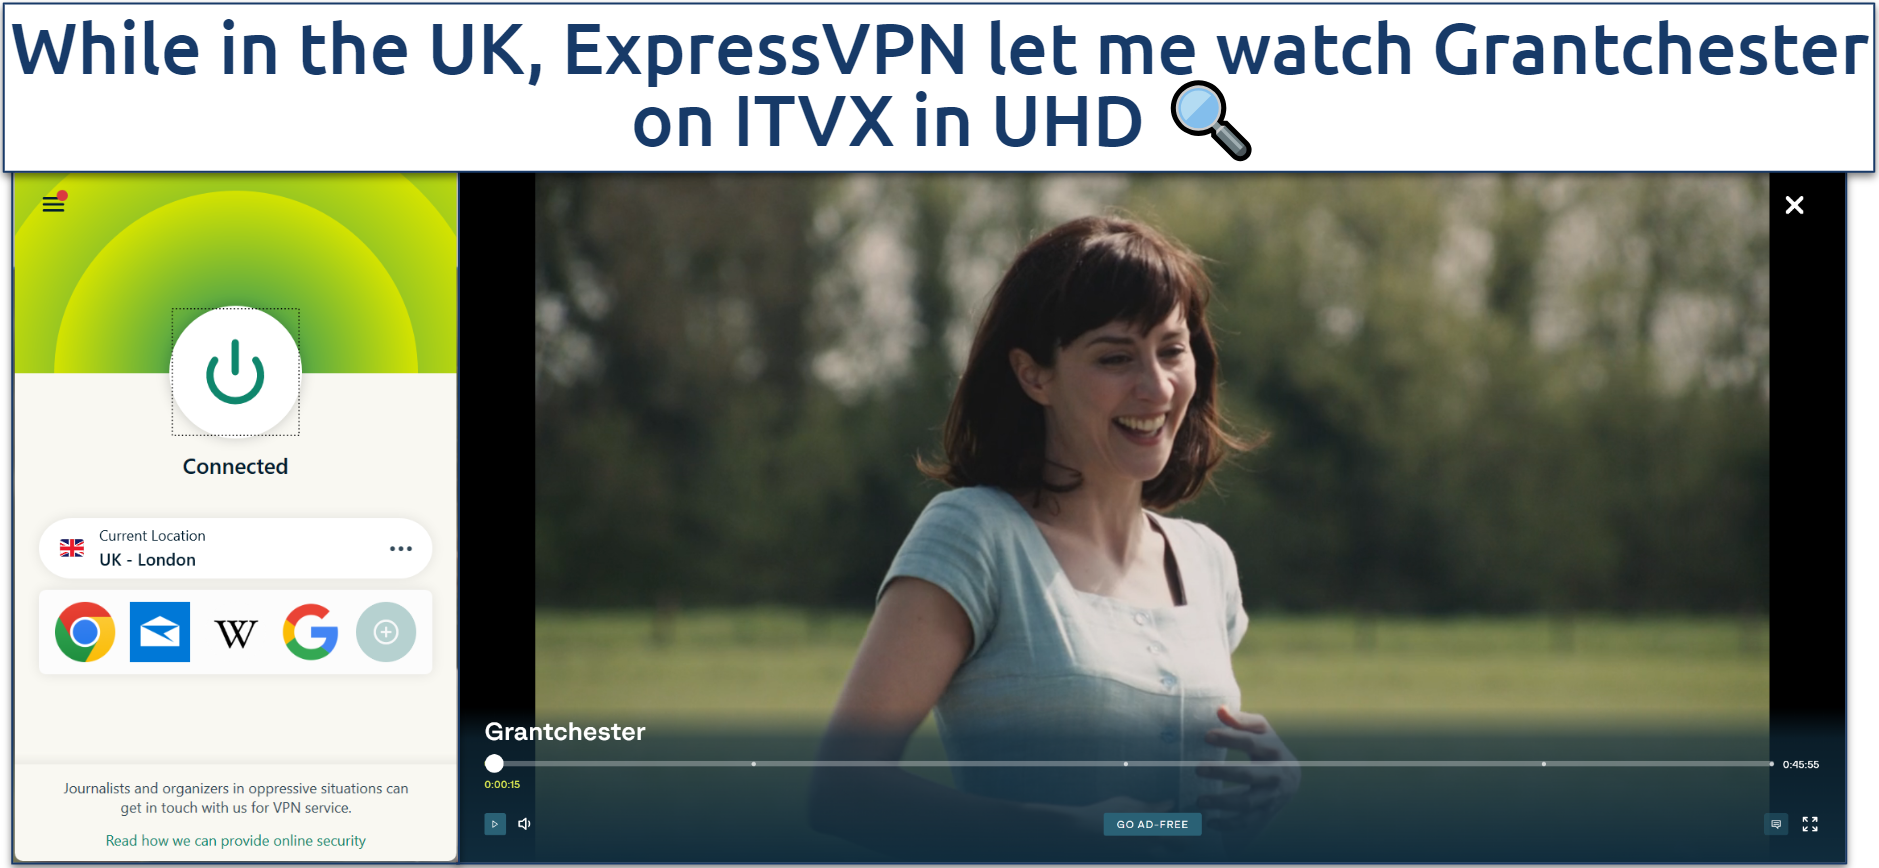 A screenshot of Grantchester streaming on ITVX with ExpressVPN connected